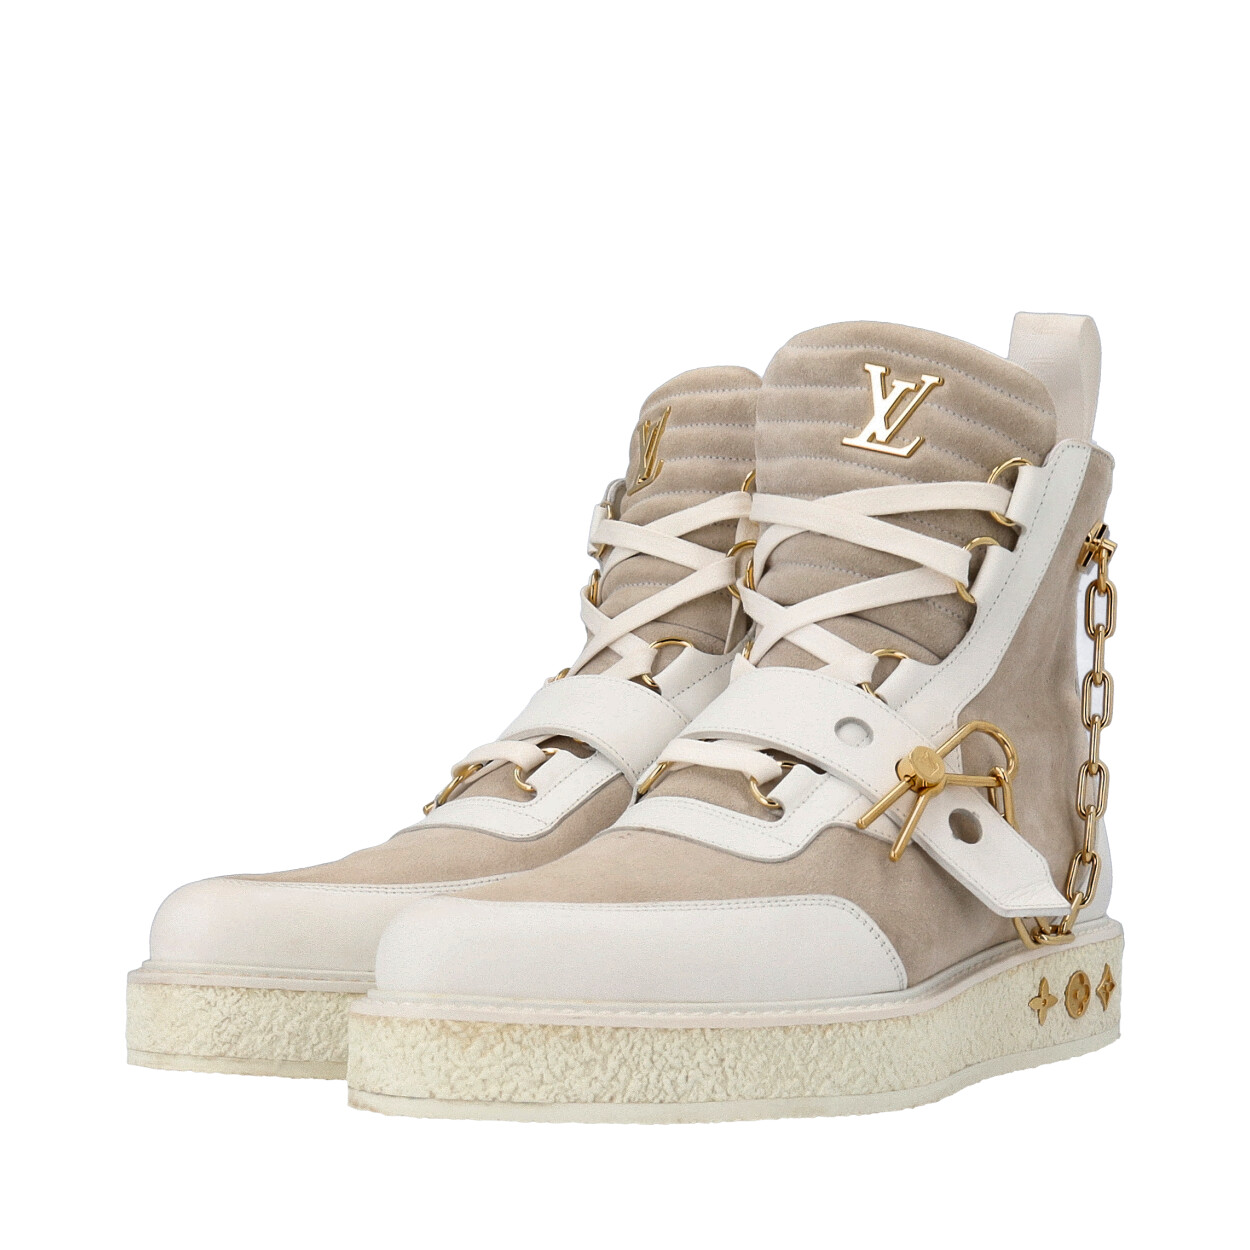 LOUIS VUITTON Suede/Leather Creeper Boots White/Grey